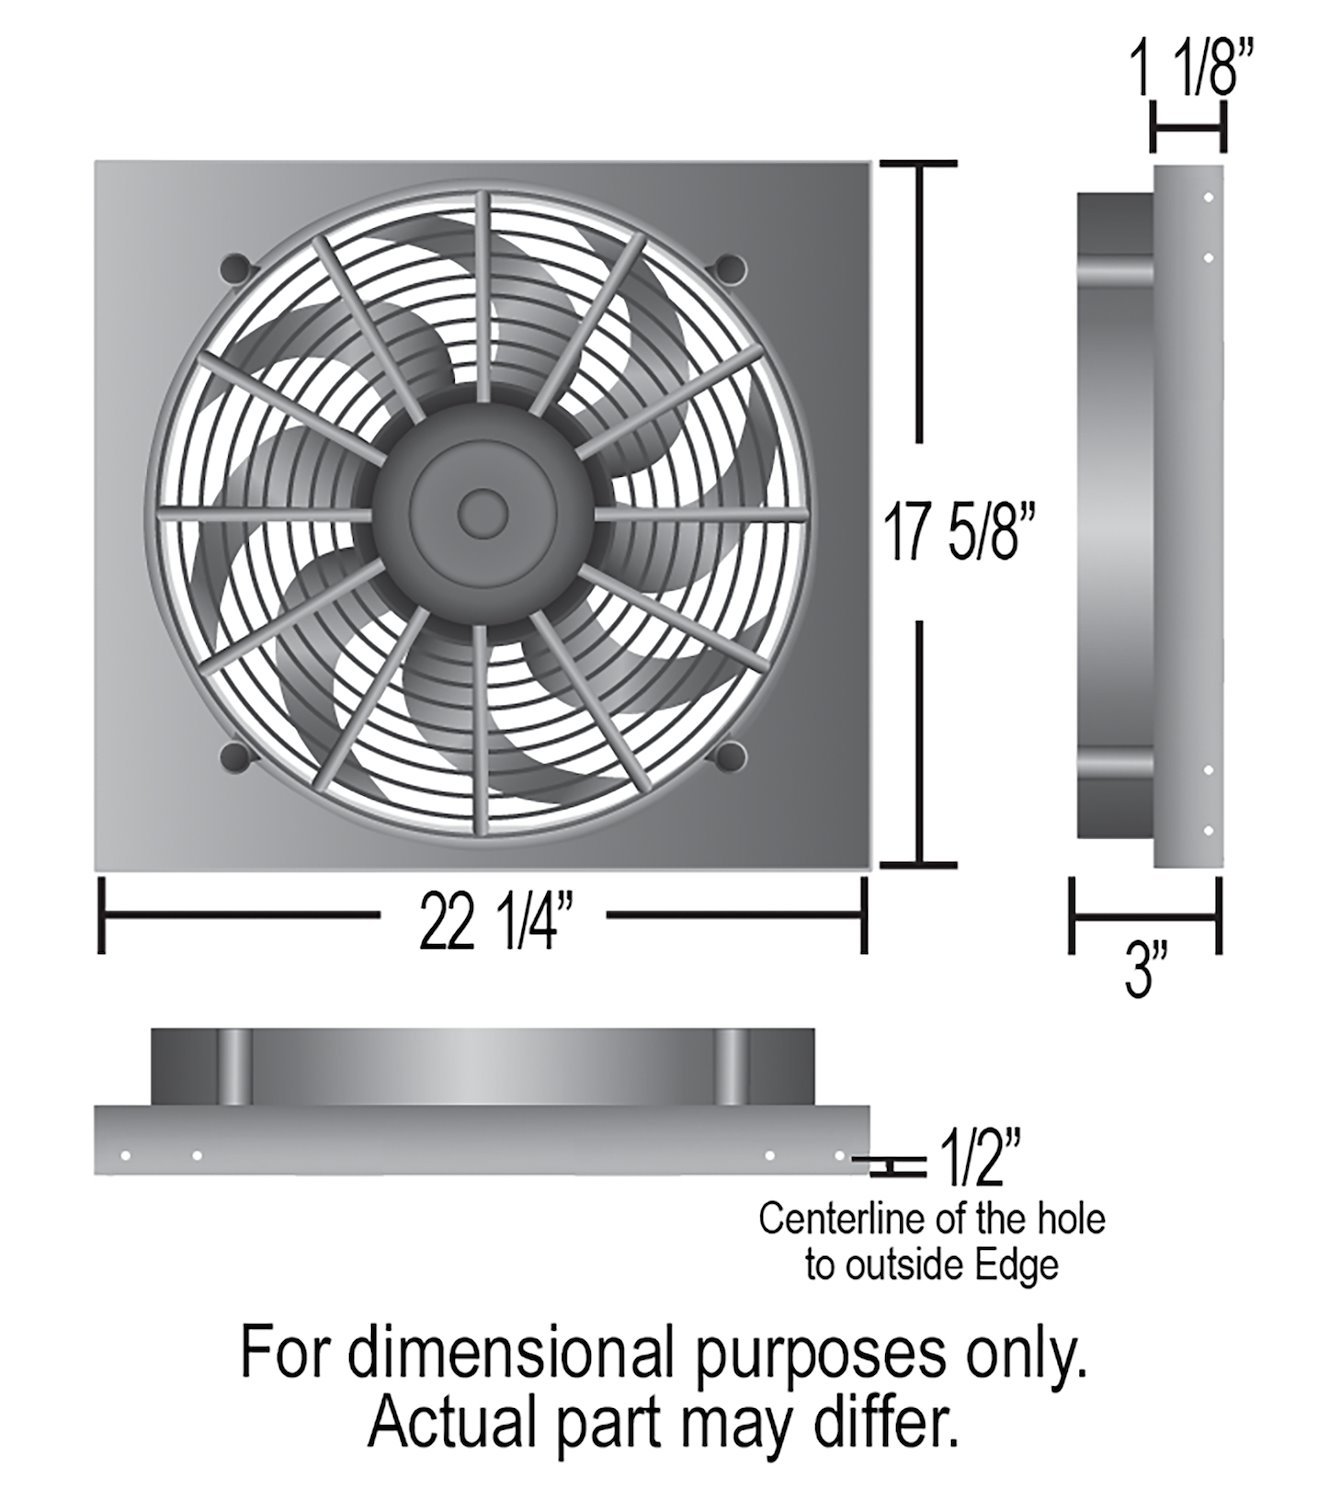 Dual Speed Electric Puller Fan with Aluminum Shroud Universal Fit